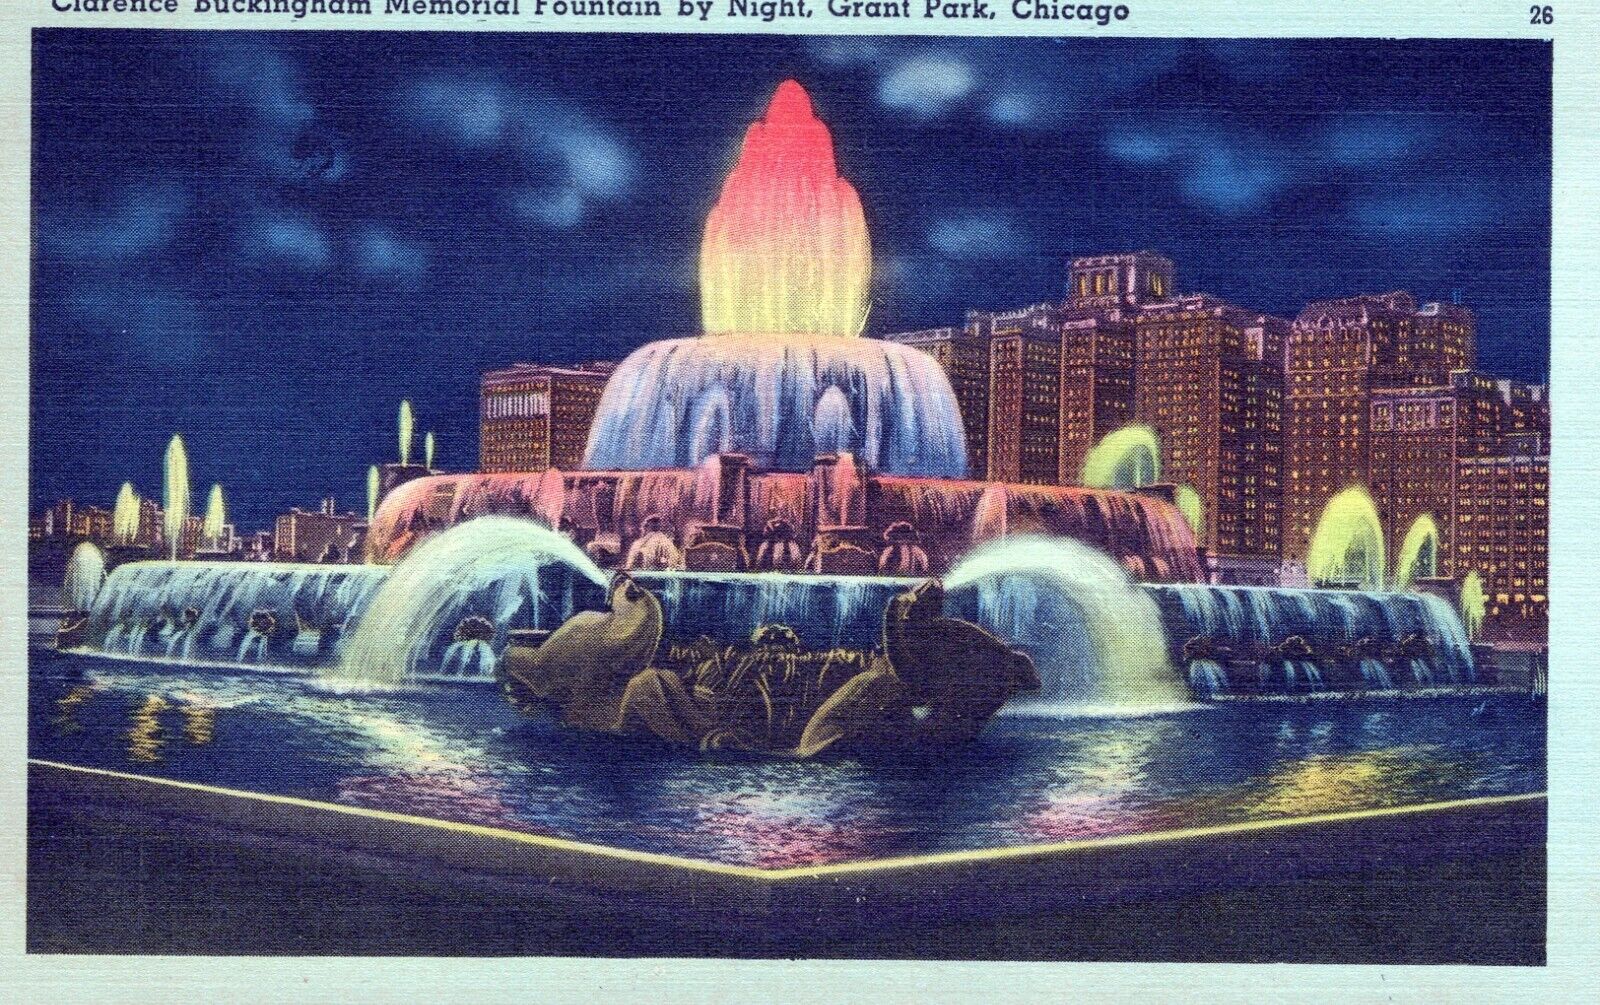 Clarence Buckingham Memorial Fountain by Night Chicago Illinois Linen Postcard